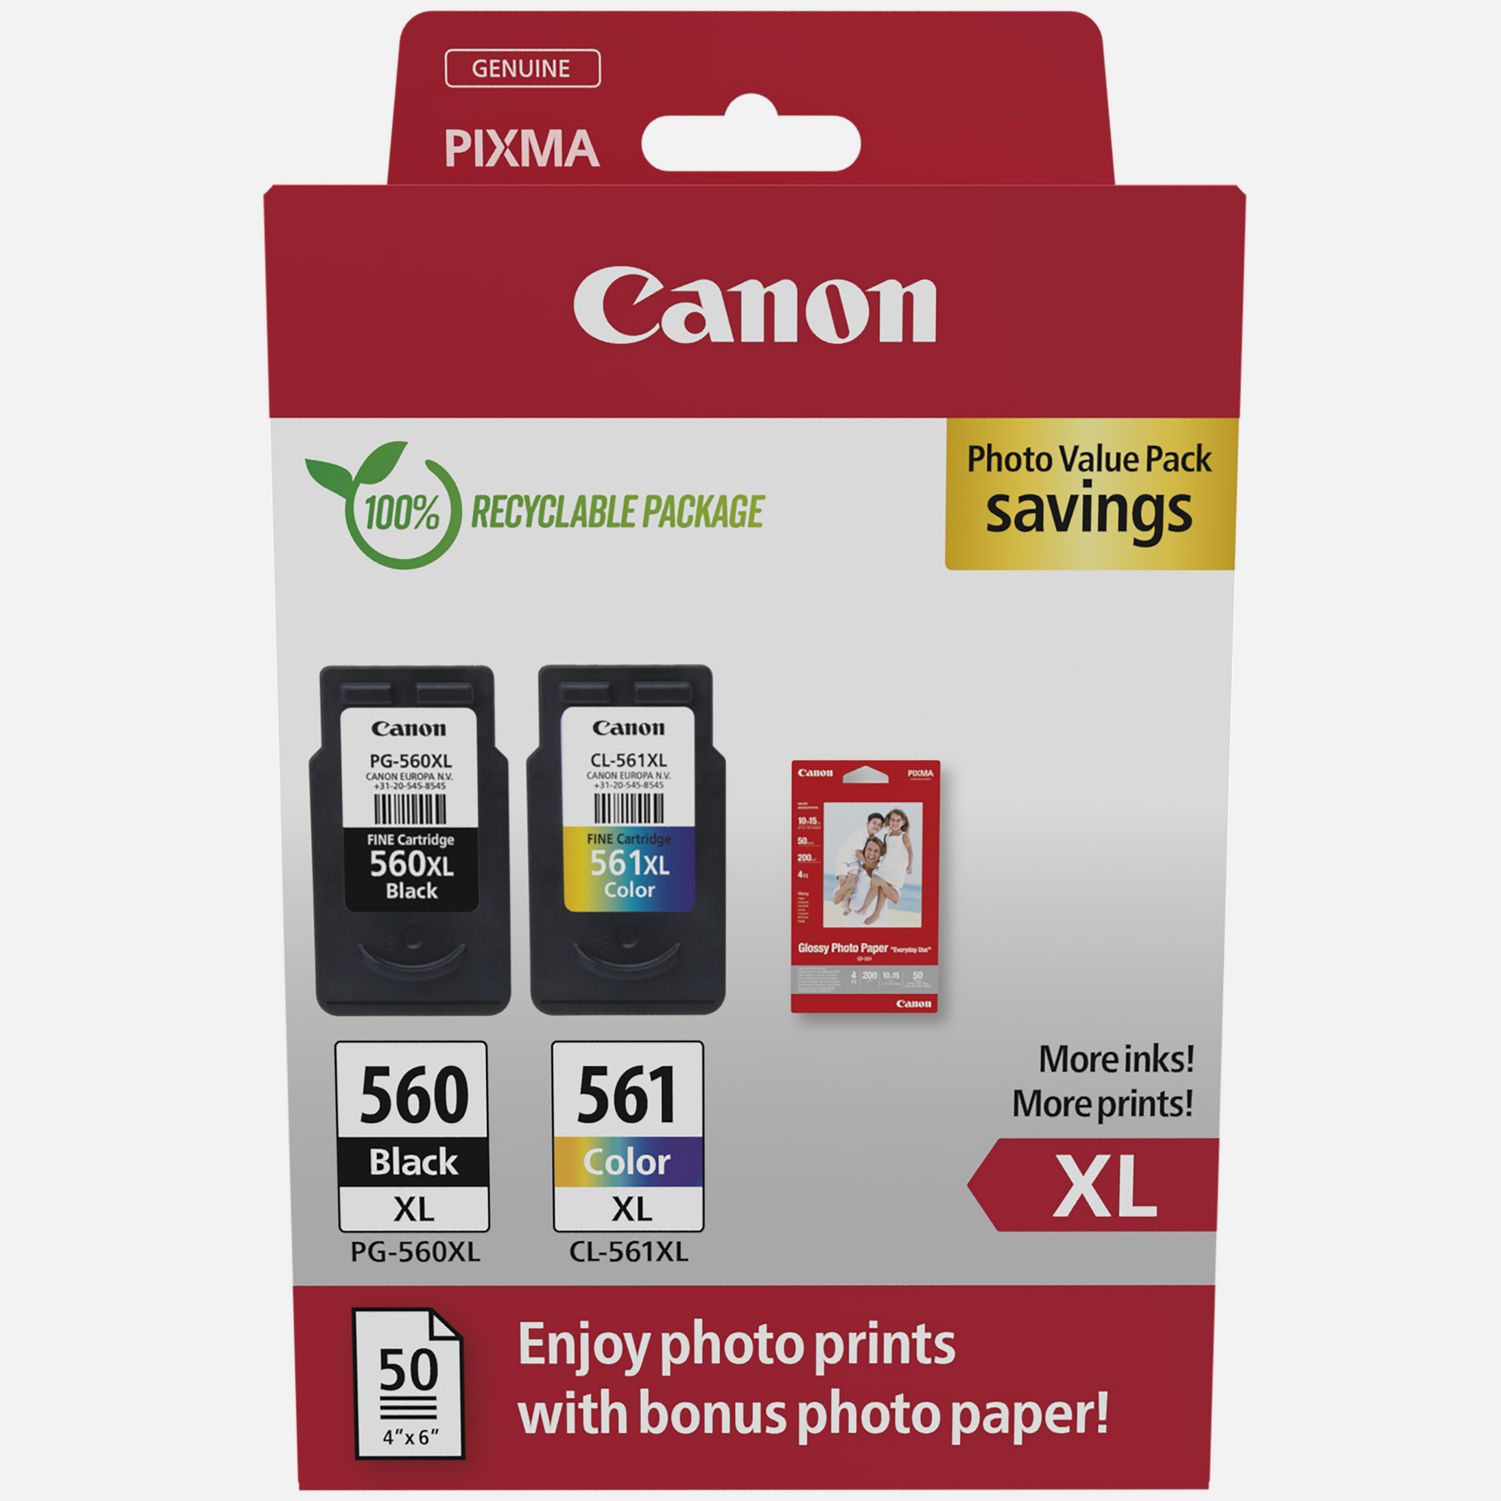 https://i1.adis.ws/i/canon/3712C008AA_PG560XL_CL561XL_Front/canon-pg-560xl-black-and-cl-561xl-colour-ink-cartridge-photo-paper-value-pack-product-package-front-view?w=1500&bg=gray95